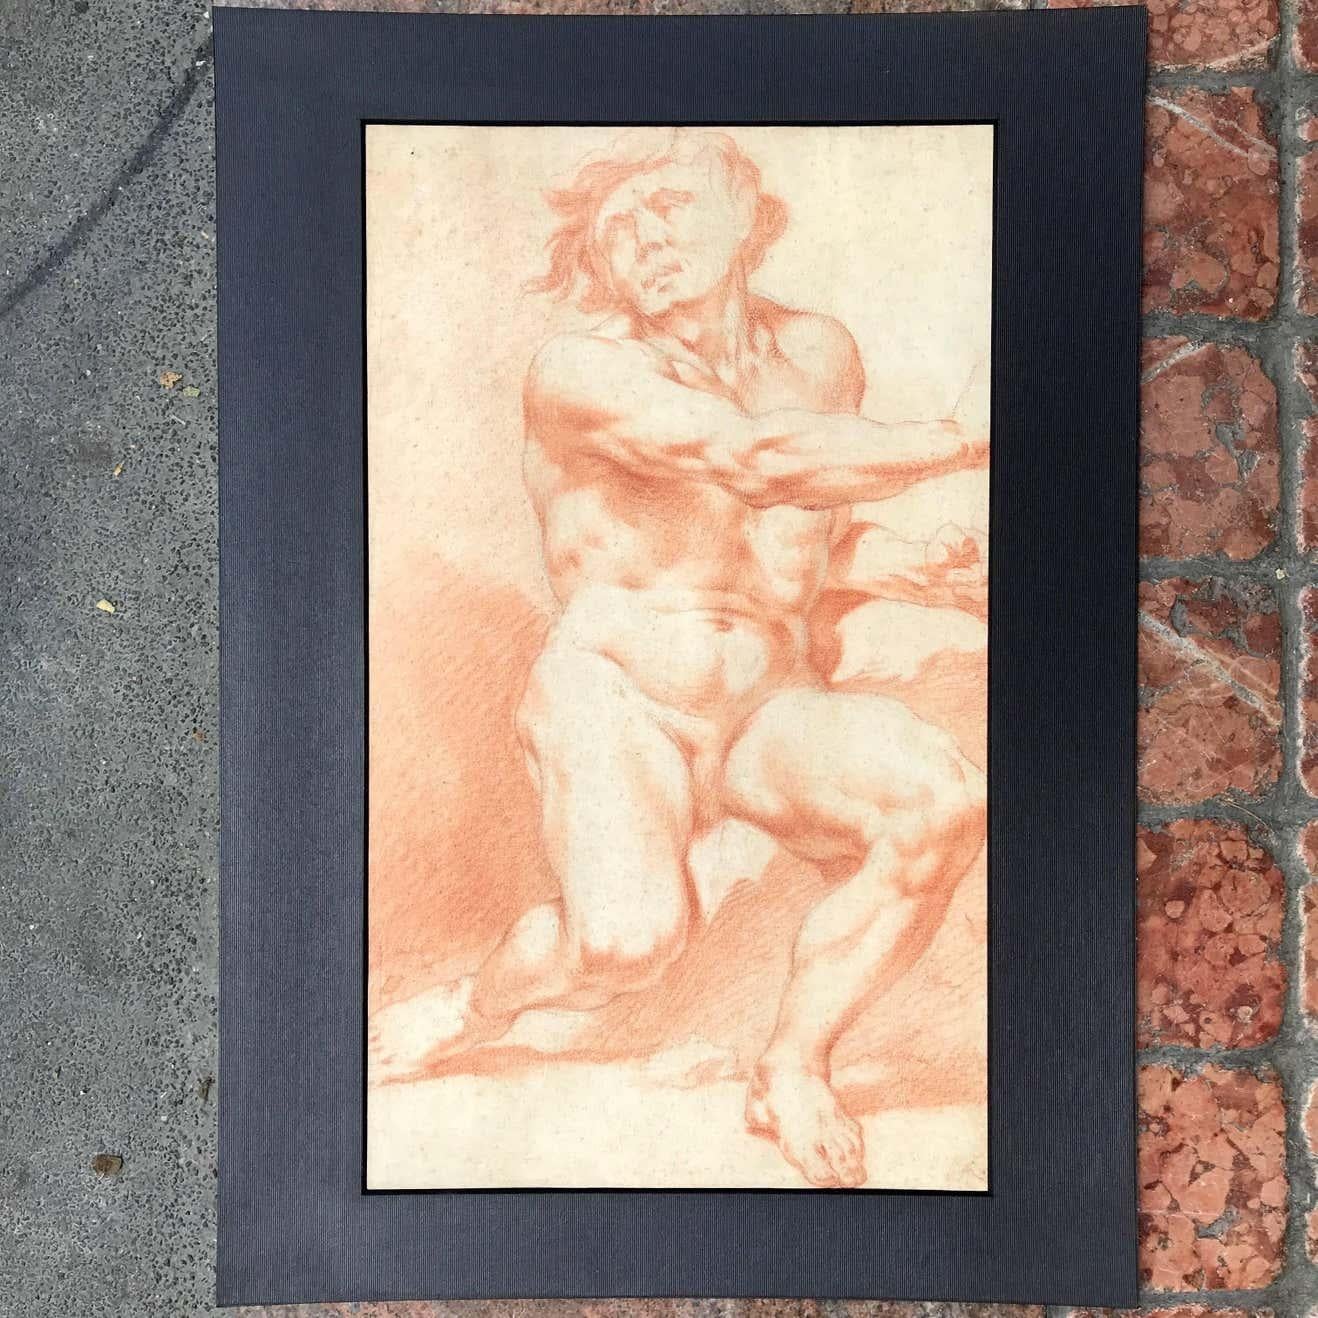 Pair of Neoclassical red sanguine on paper drawings of seated male nudes, two academical study of nude men, Italian drawing works on paper after Procaccini, dating back to late 18th century.
Both works come from a private collection in Milan and are